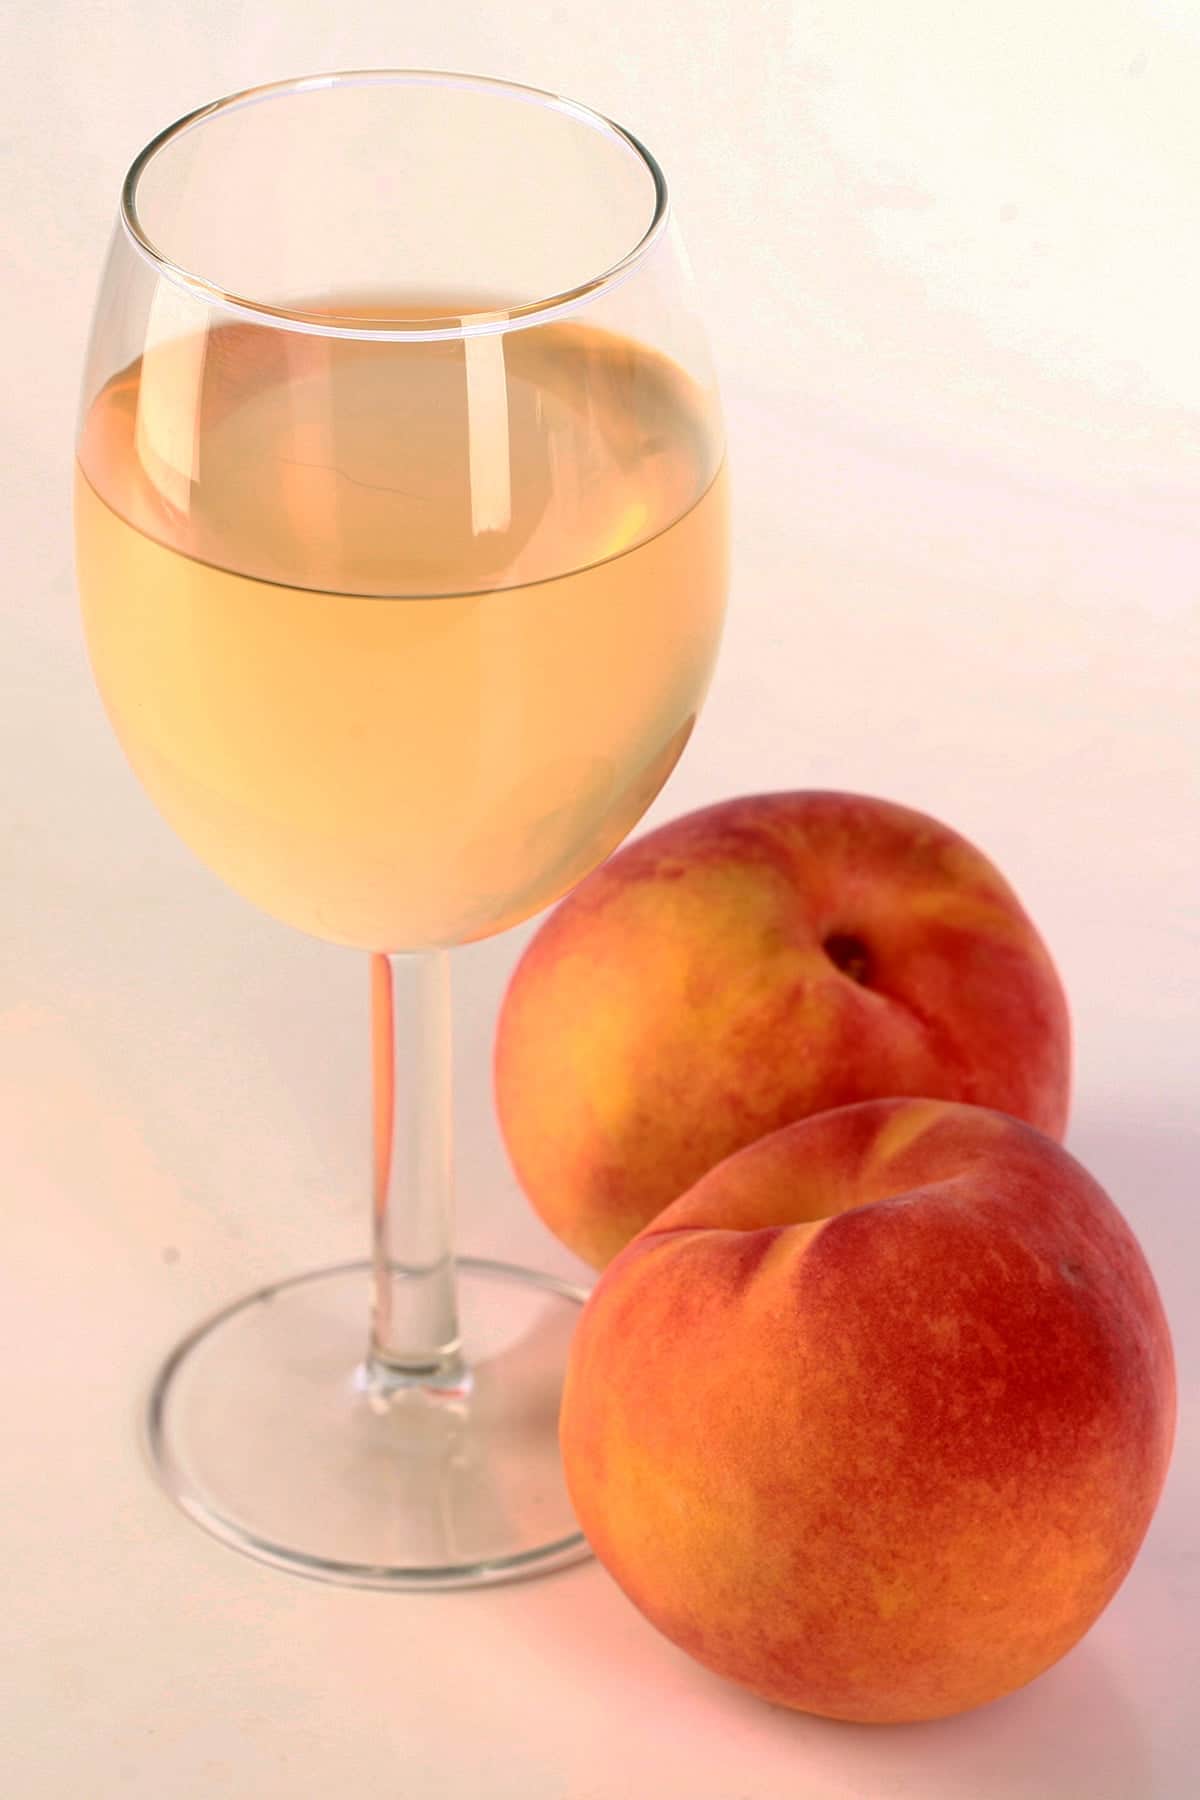 A glass of pale peach coloured wine, with 2 fresh peaches at the base of the glass.